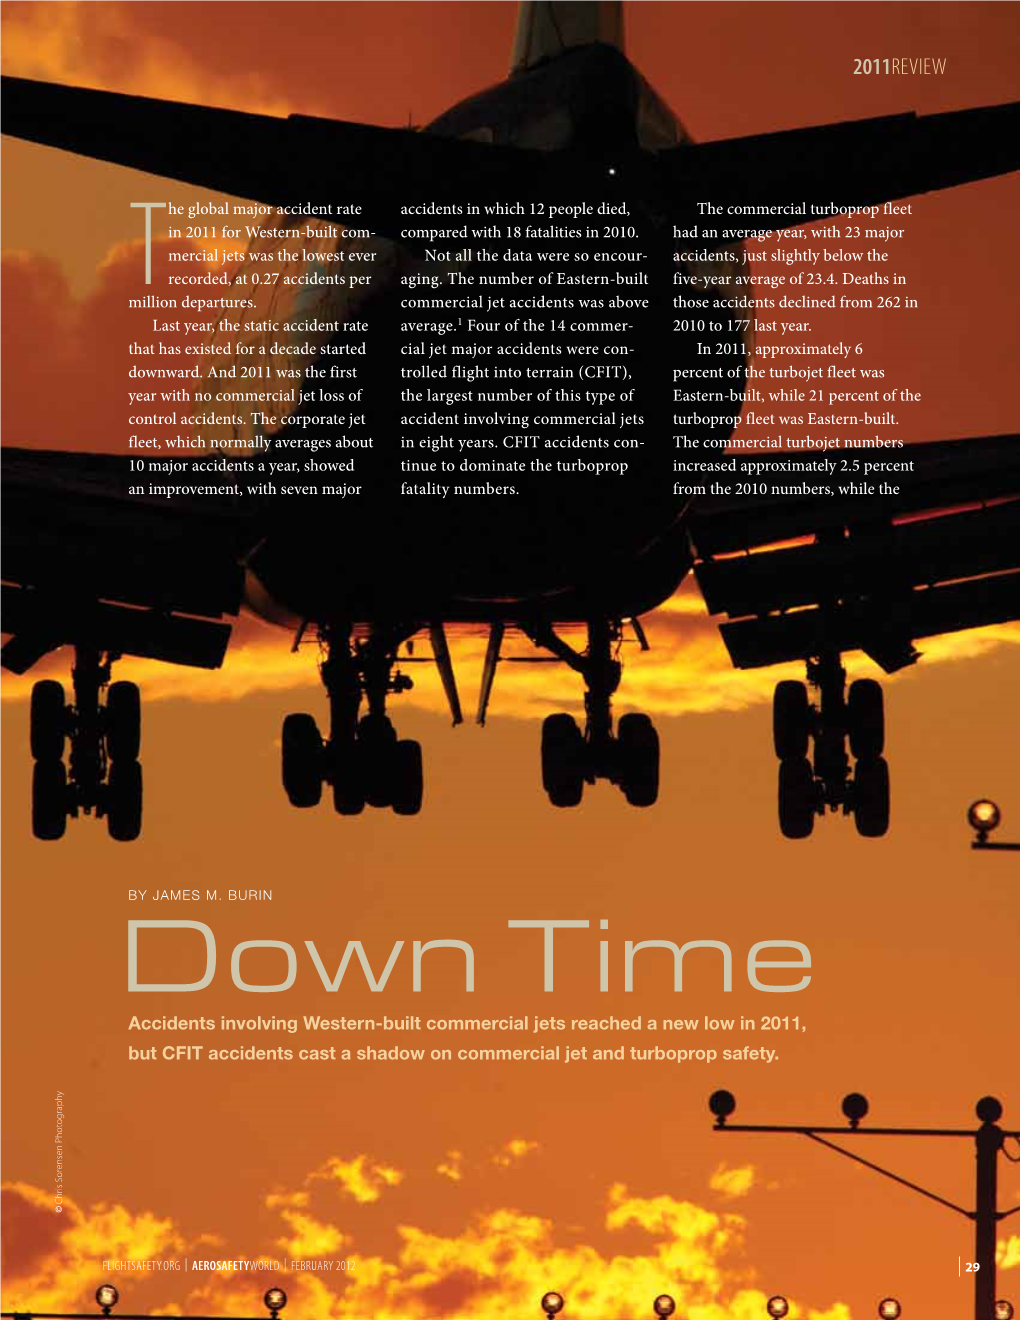 Down Time Accidents Involving Western-Built Commercial Jets Reached a New Low in 2011, but CFIT Accidents Cast a Shadow on Commercial Jet and Turboprop Safety